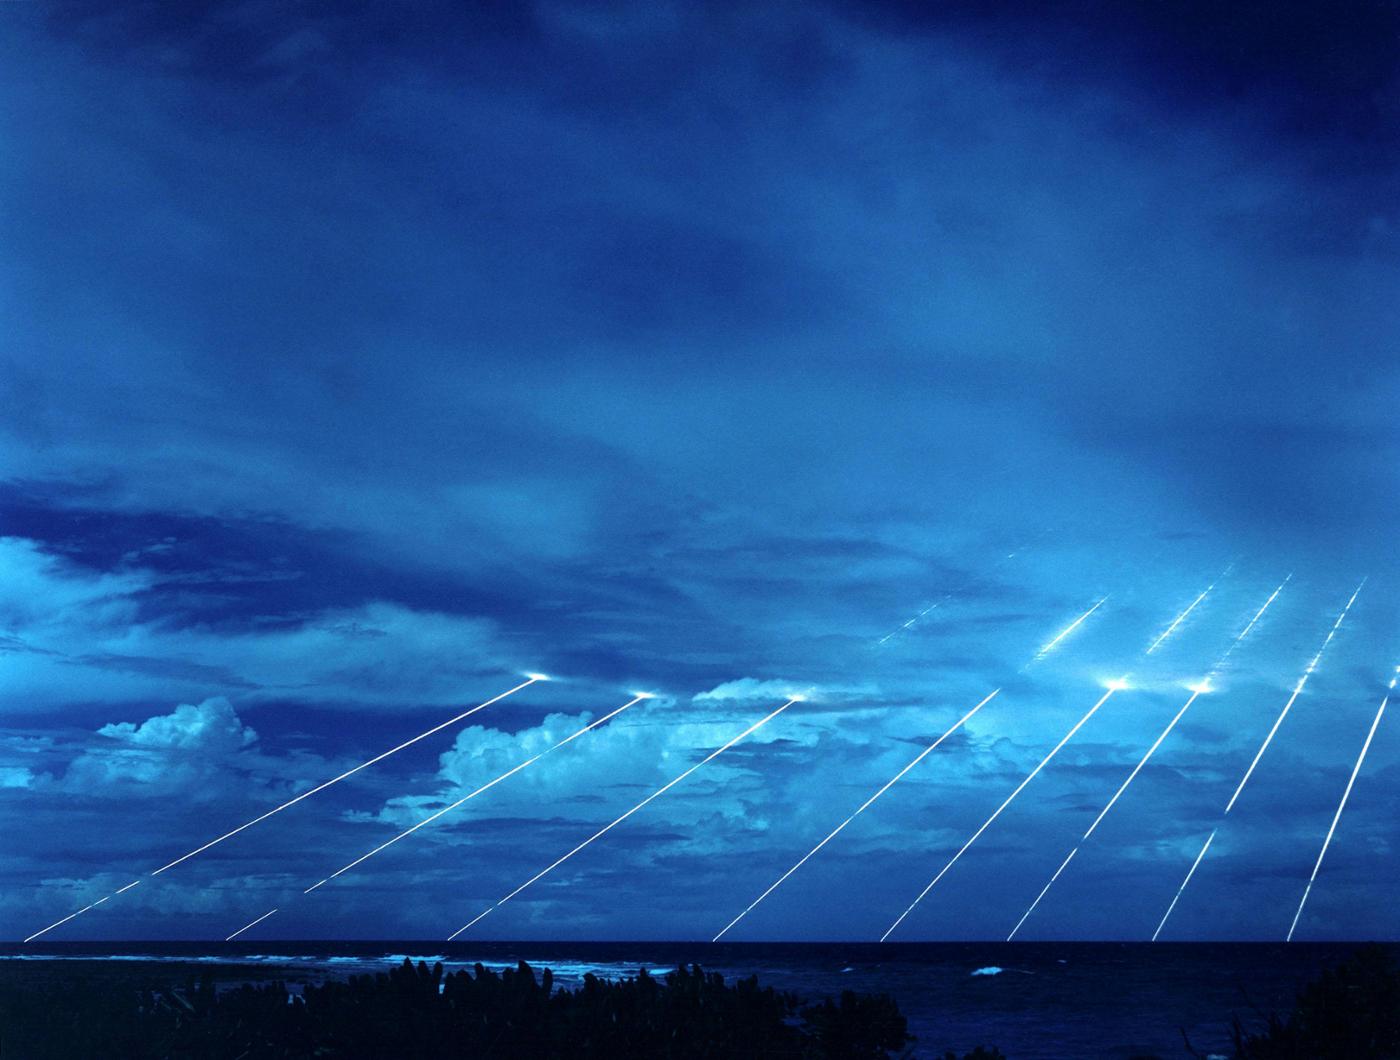 Testing of the ‘Peacekeeper’ reentry vehicles: all eight (of a possible ten) were fired from only one missile. Each line shows the path of an individual warhead captured on reentry via long-exposure photography. Photo © Wikipedia
)